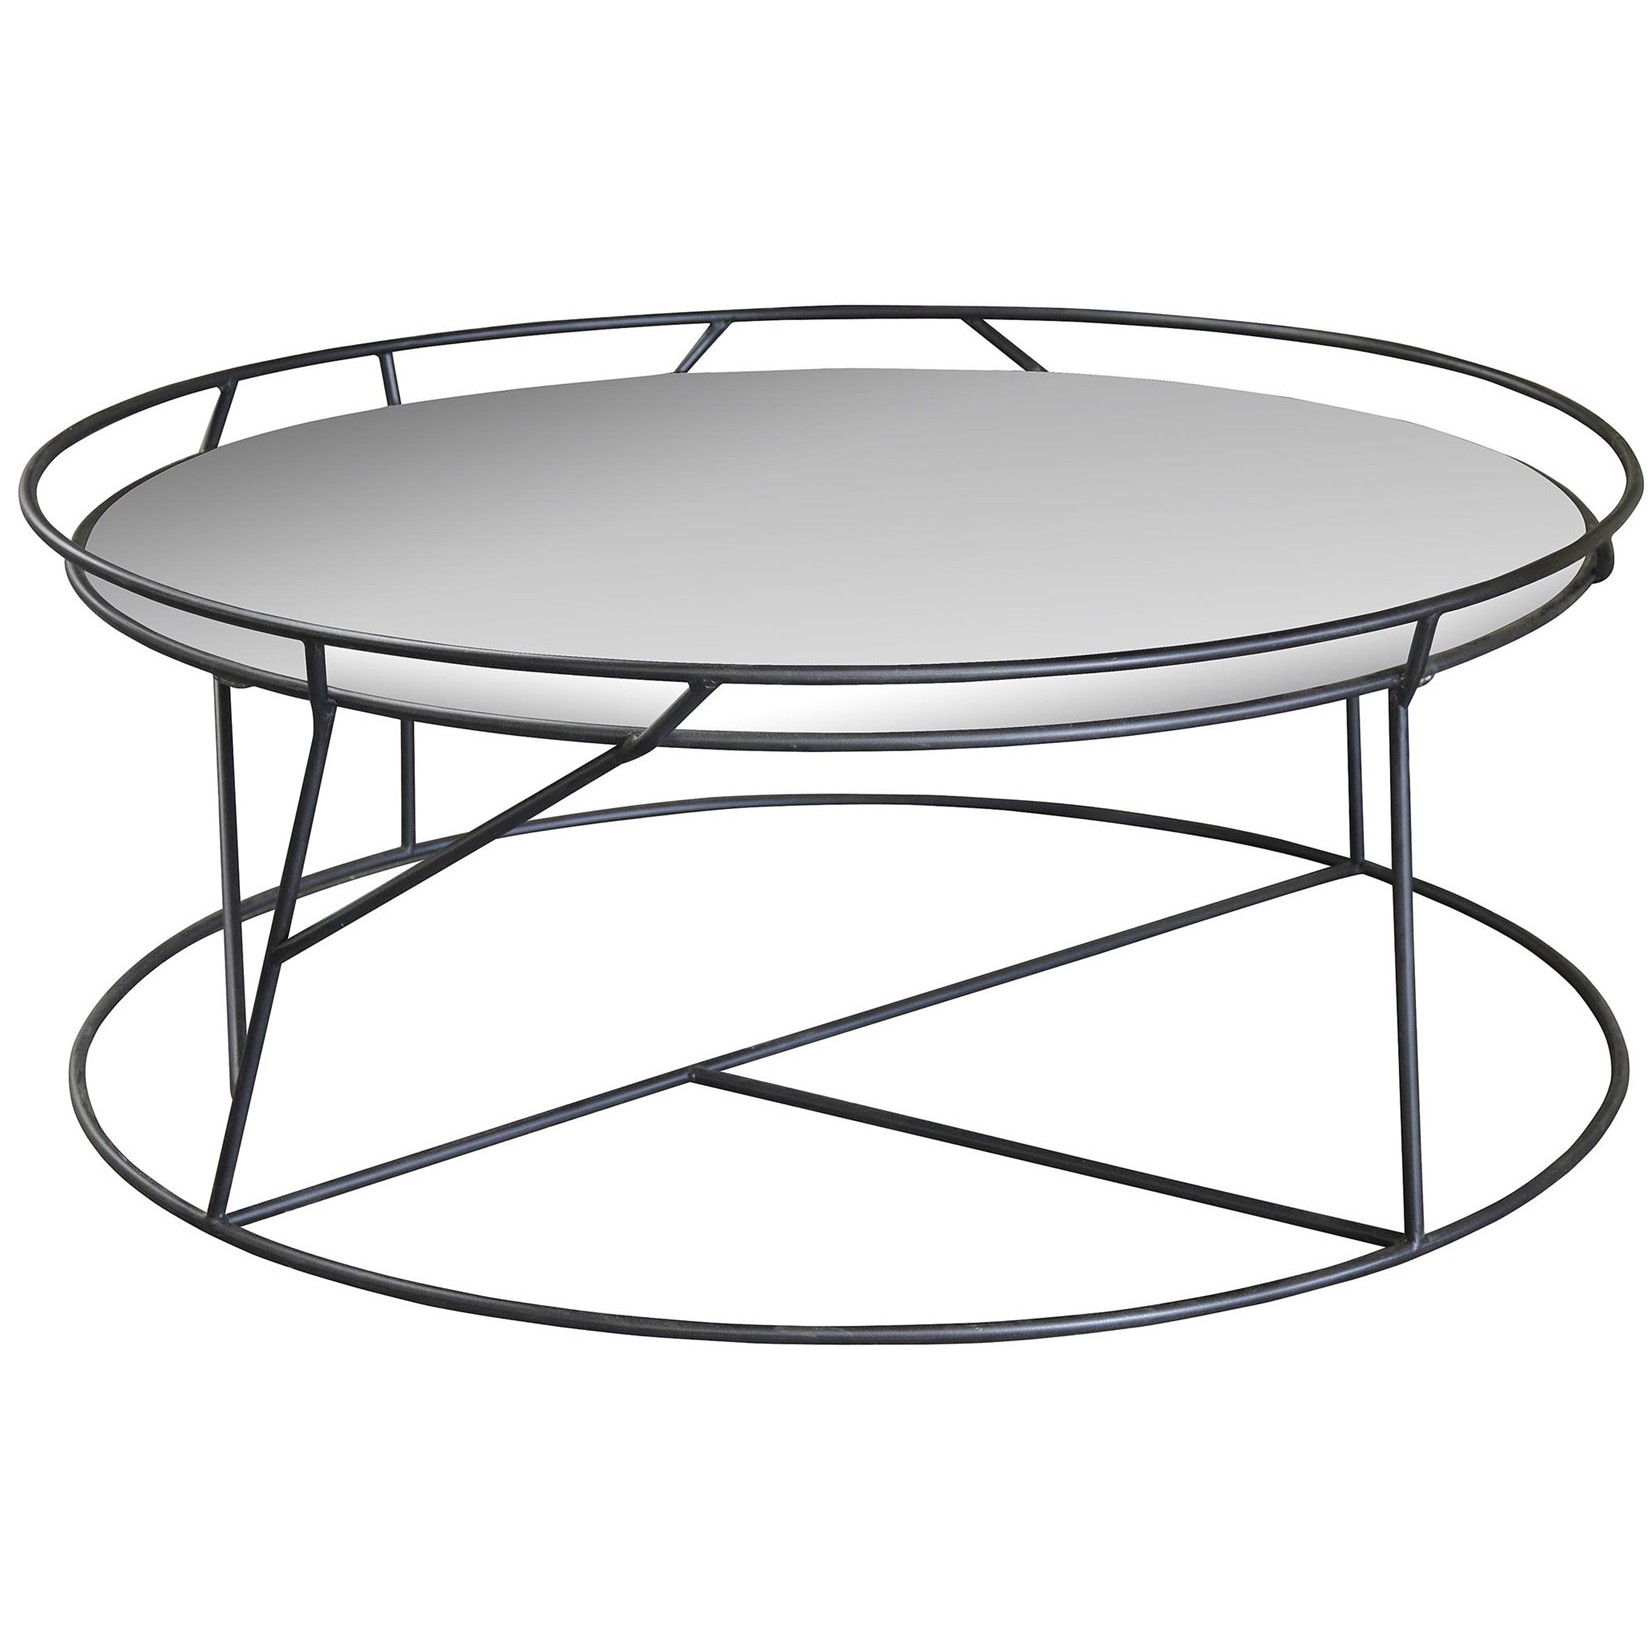 Coffee Table Drawing at GetDrawings | Free download